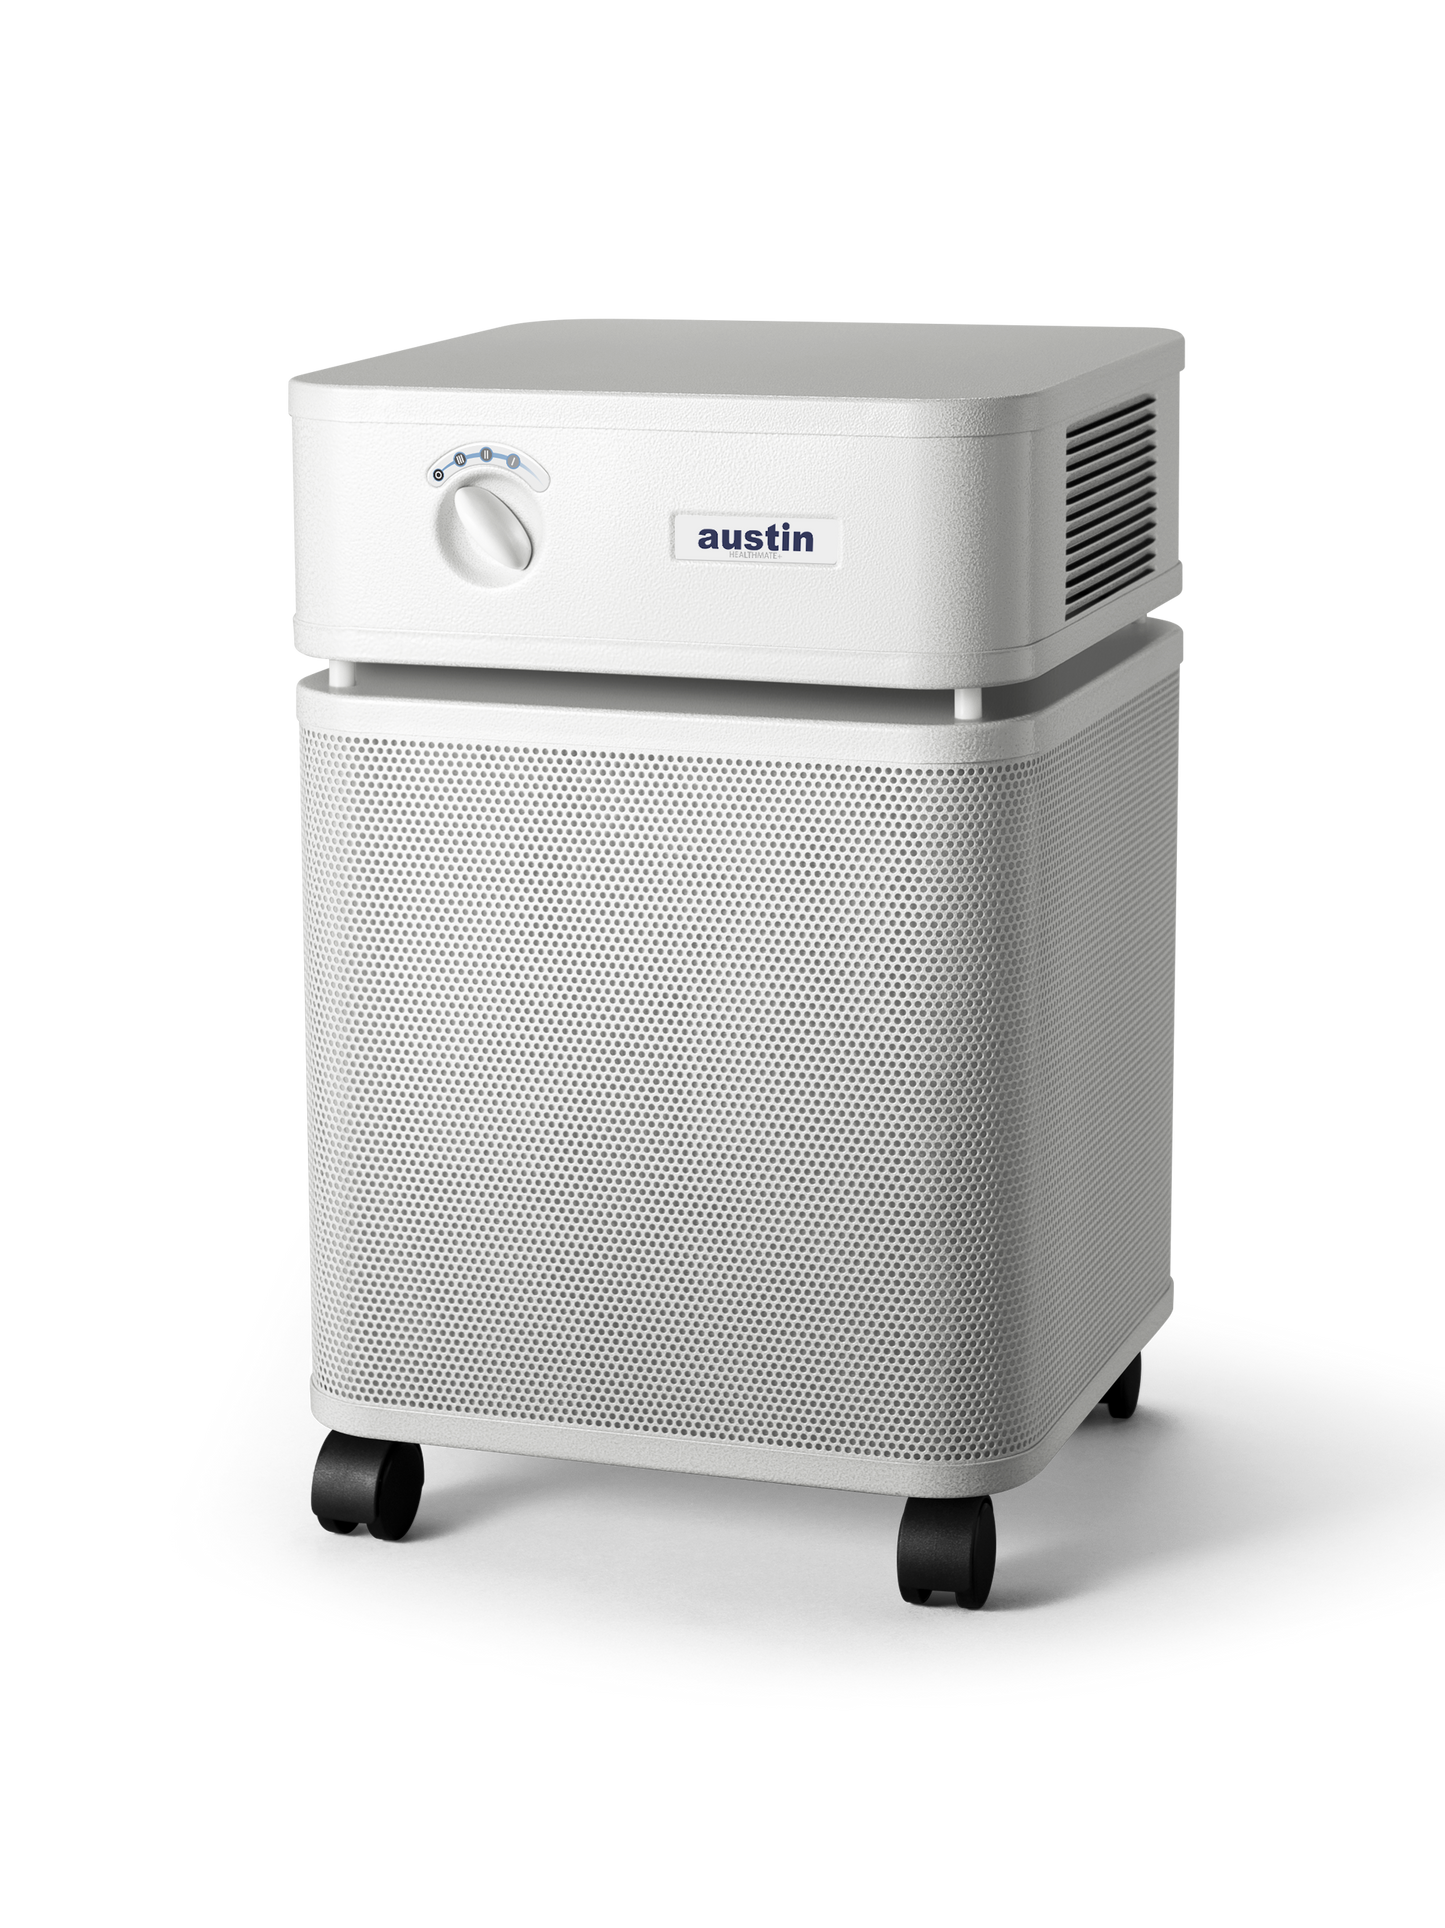 Austin Air Healthmate Plus, HEPA Medical-Grade Filtration System with Activated Carbon